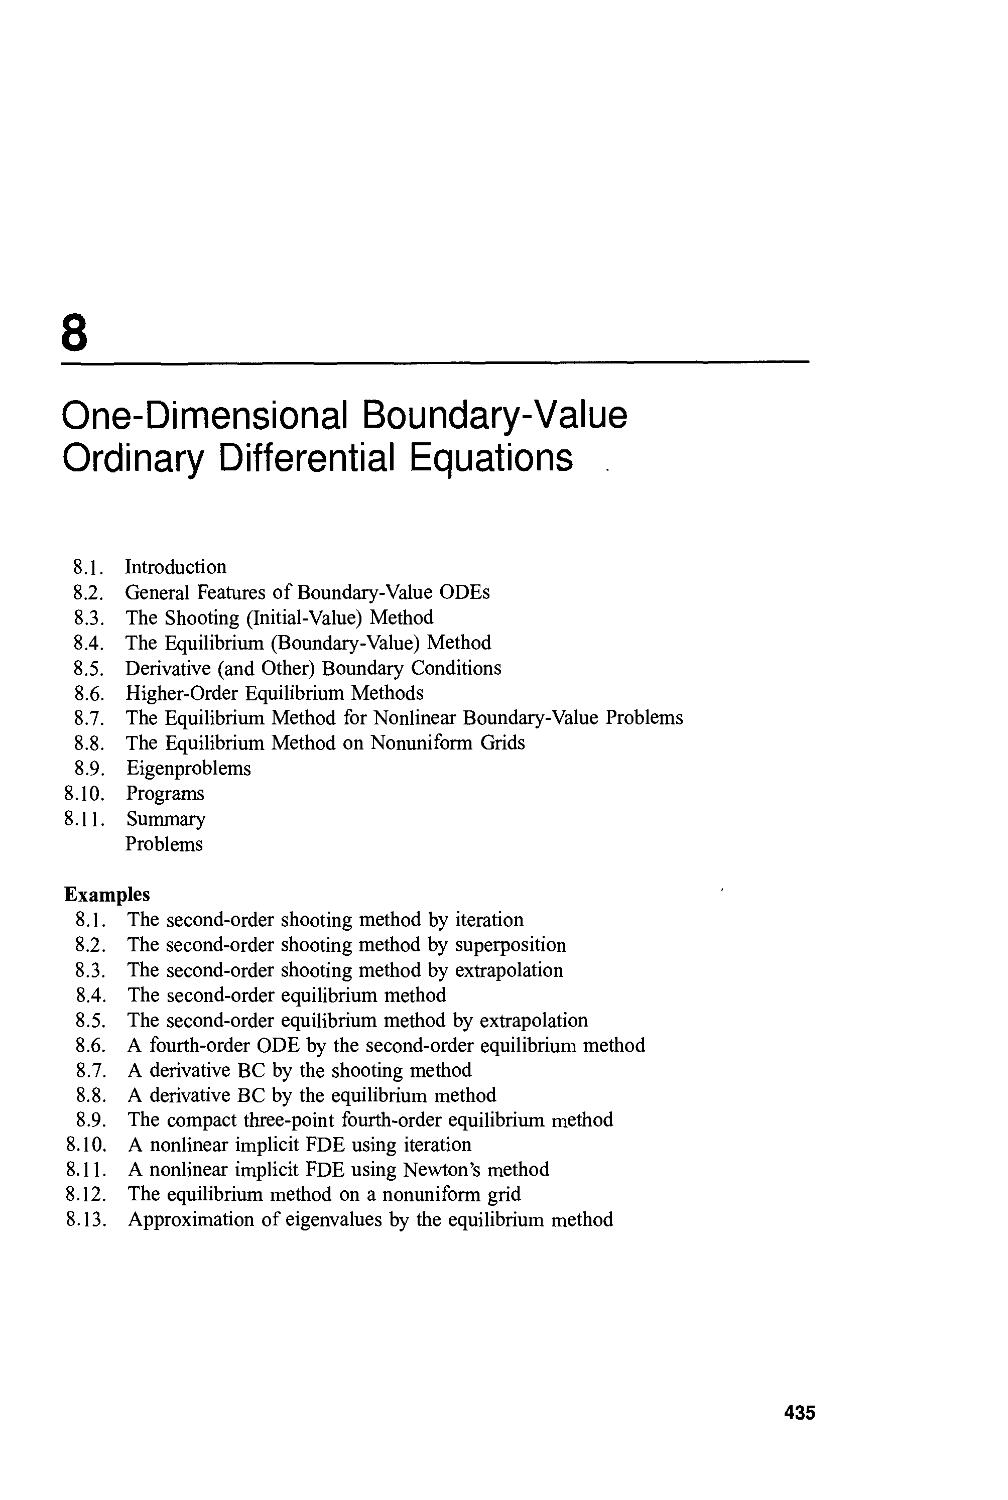 1-Dimensional Boundary Value ODE's